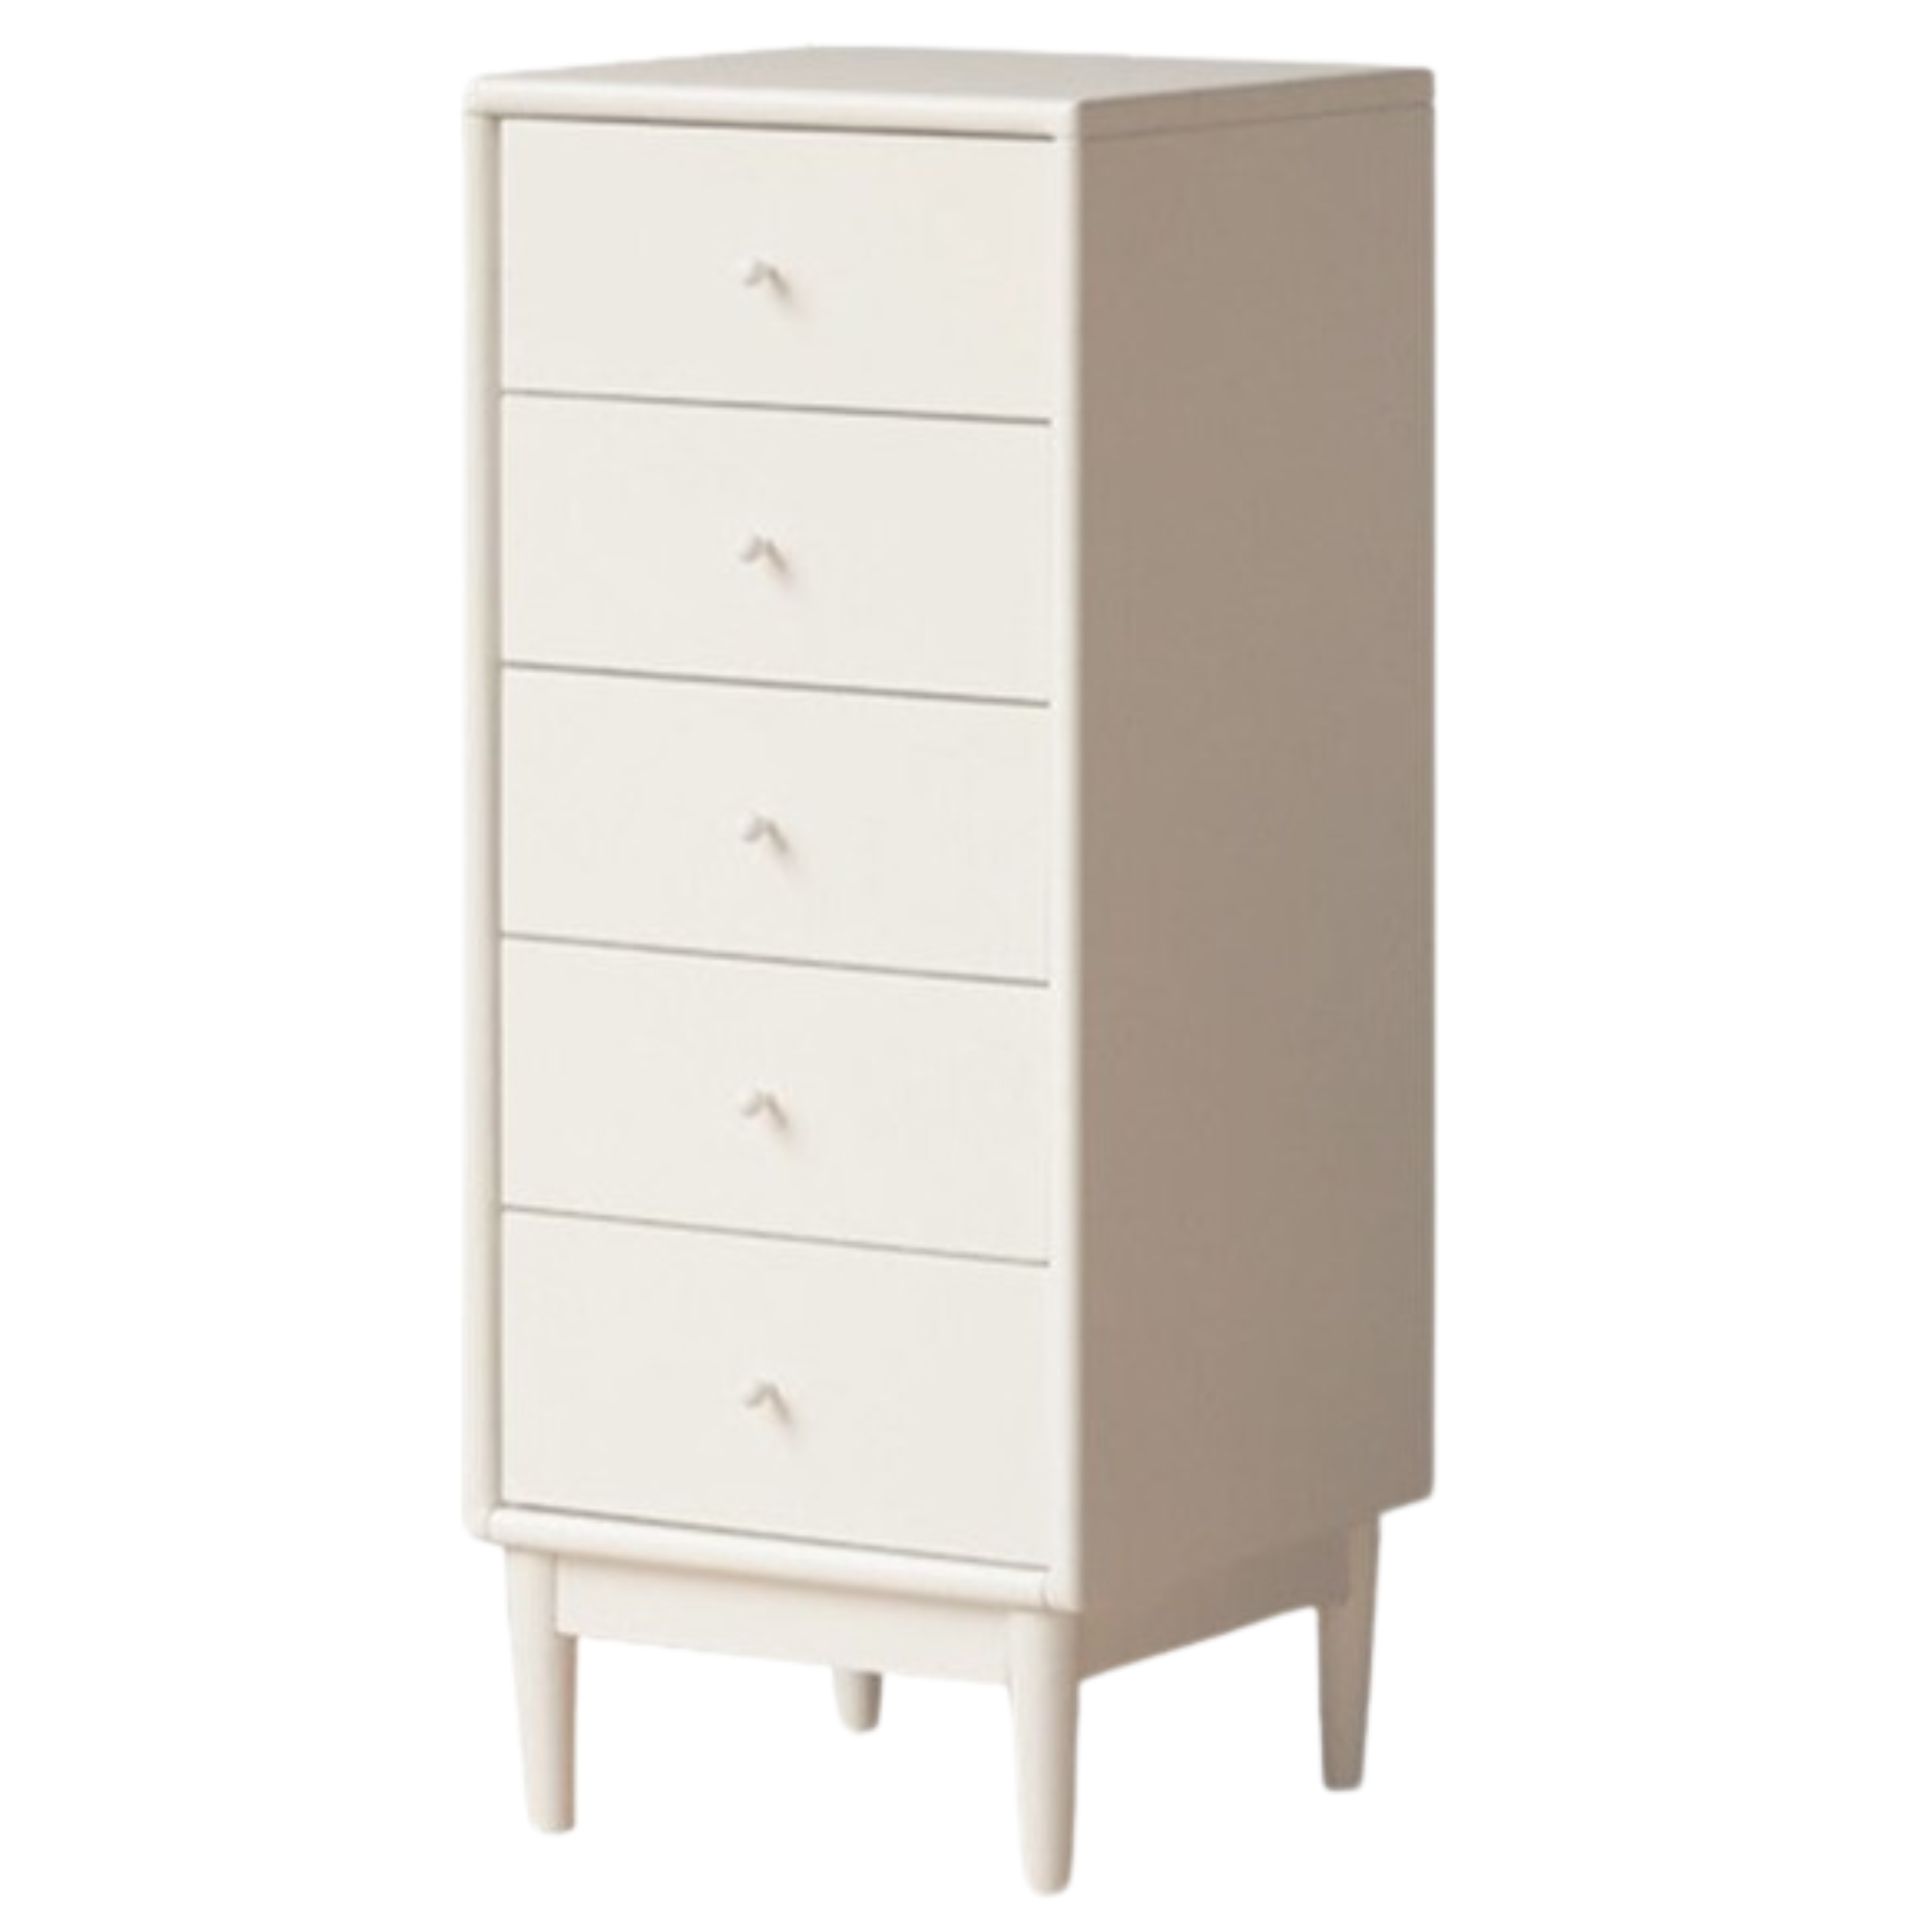 Poplar solid wood chest of drawers storage cabinet cream style drawers cabinet)